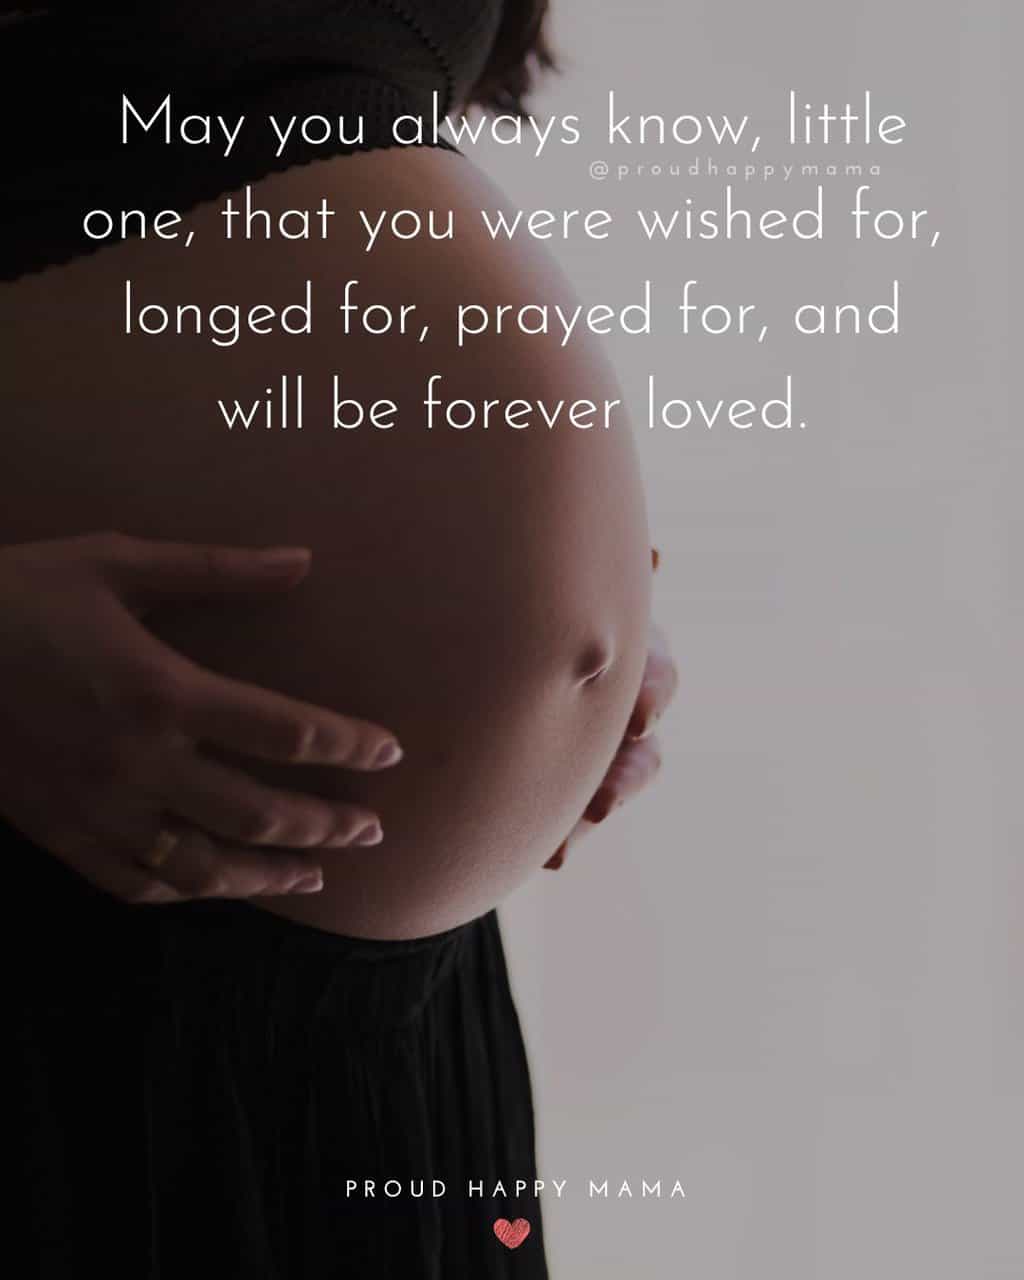 Pregnancy quotes - 'May you always know, little one, that you were wished for, longed for, prayed for, and will be forever loved.'